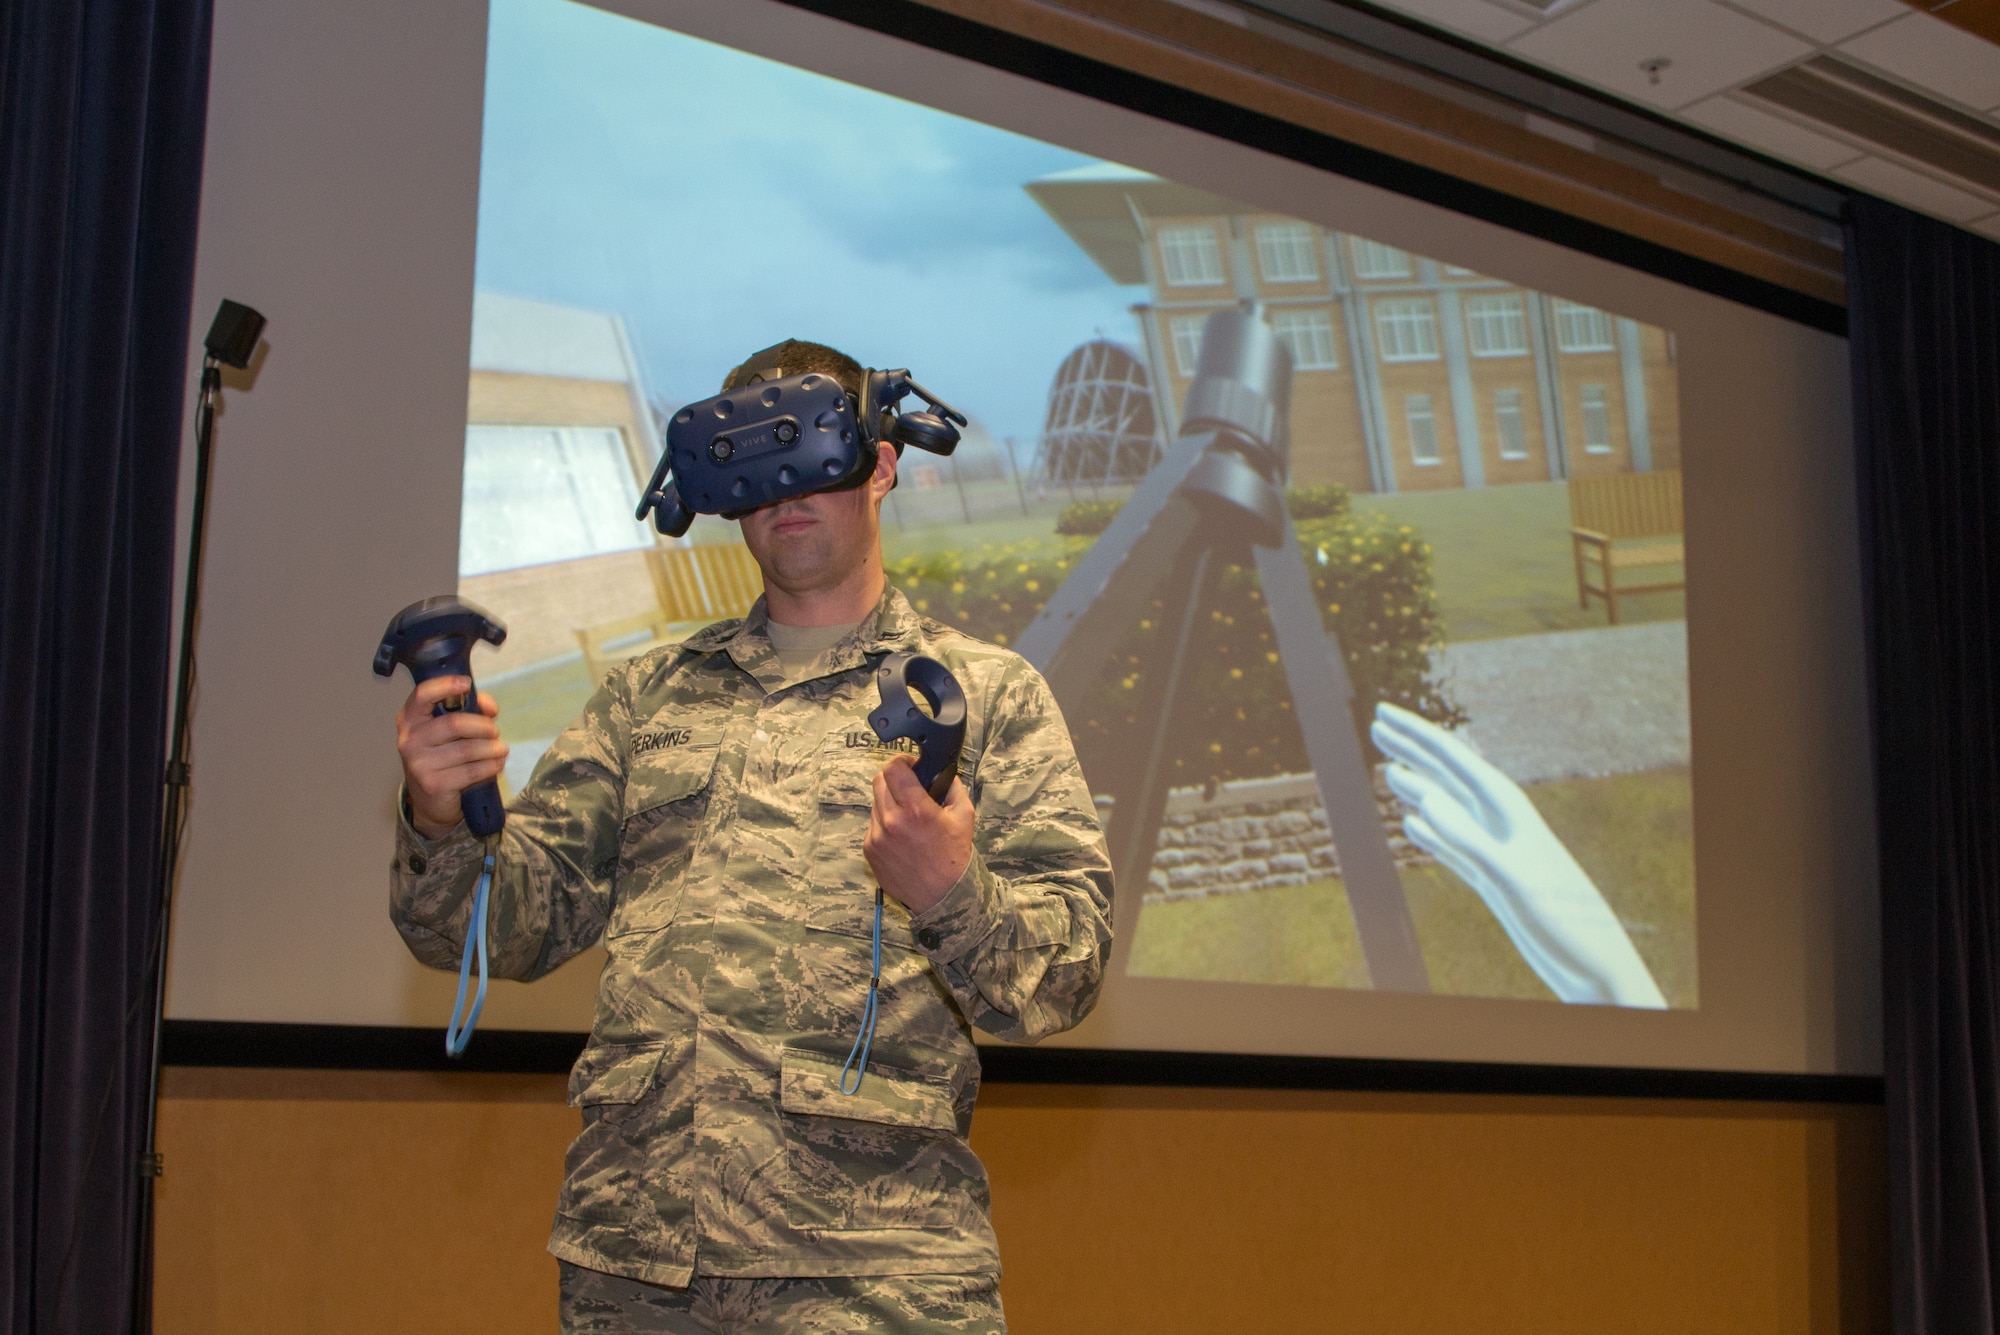 Capt. Matthew Perkins, 1st Weather Group science officer, sets up a tripod in virtual reality during a product handover March 14, 2019, at Offutt Air Force Base, Nebraska. The 1st WXG VR training software allows Airmen to train in locations where equipment may not be readily available and reduces wear and tear on actual equipment. (U.S. Air Force photo by Paul Shirk)